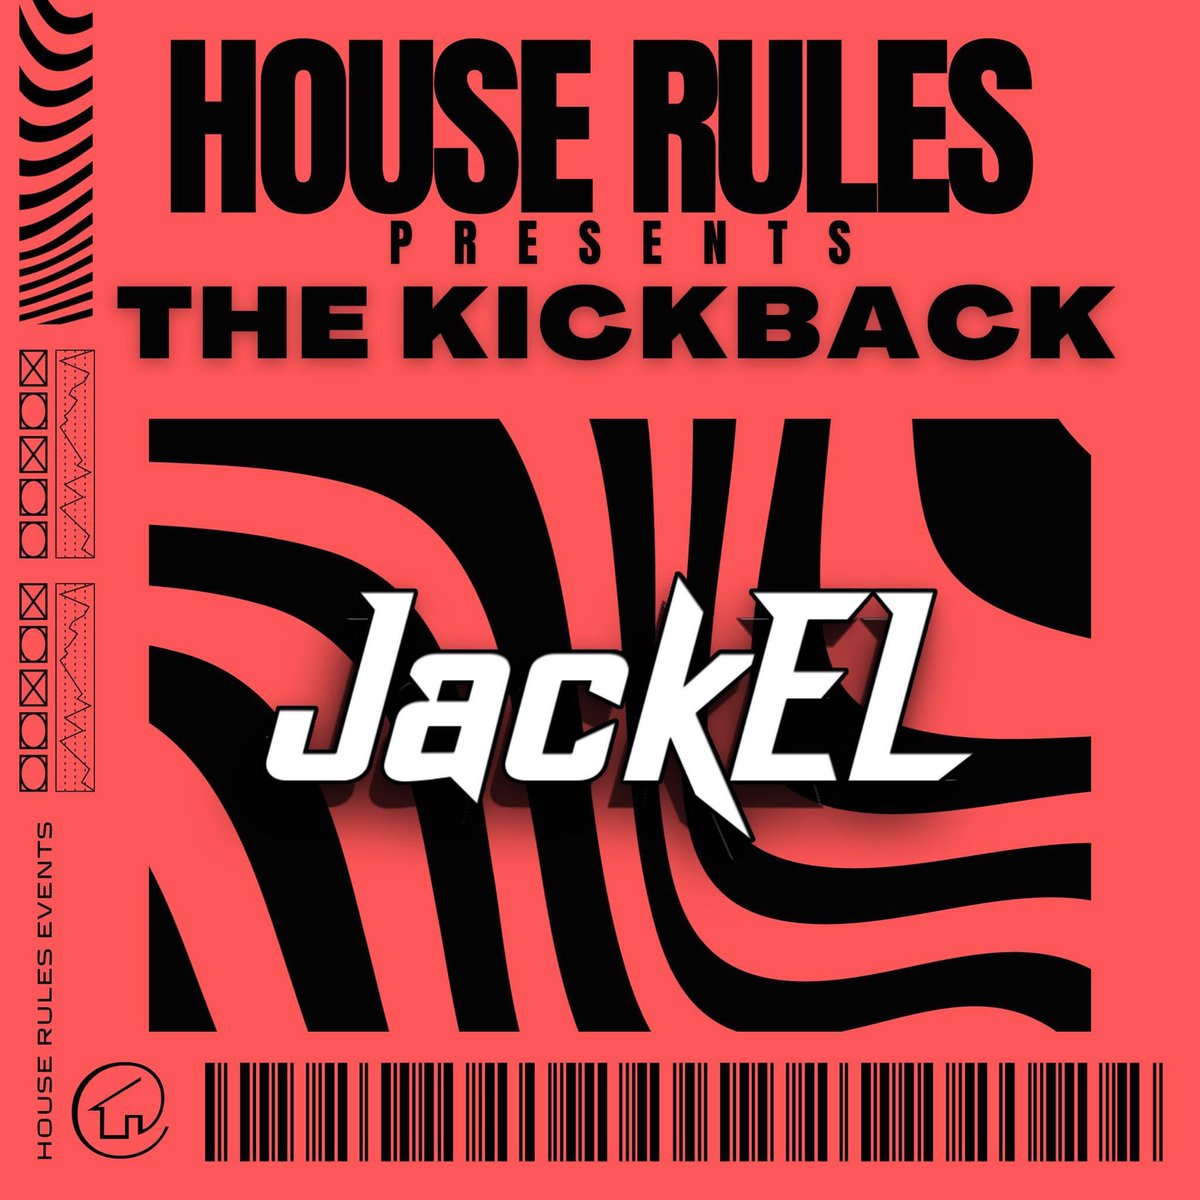 This DJ/Producer has been shaking up the North American house sphere with massive consistent original releases. The man @officialjackel is in the #house for episode 3 takeover at #TheKickback Stream: podlink.to/TheKickback-Ja… #houserules #djmix #spotify #google #edm